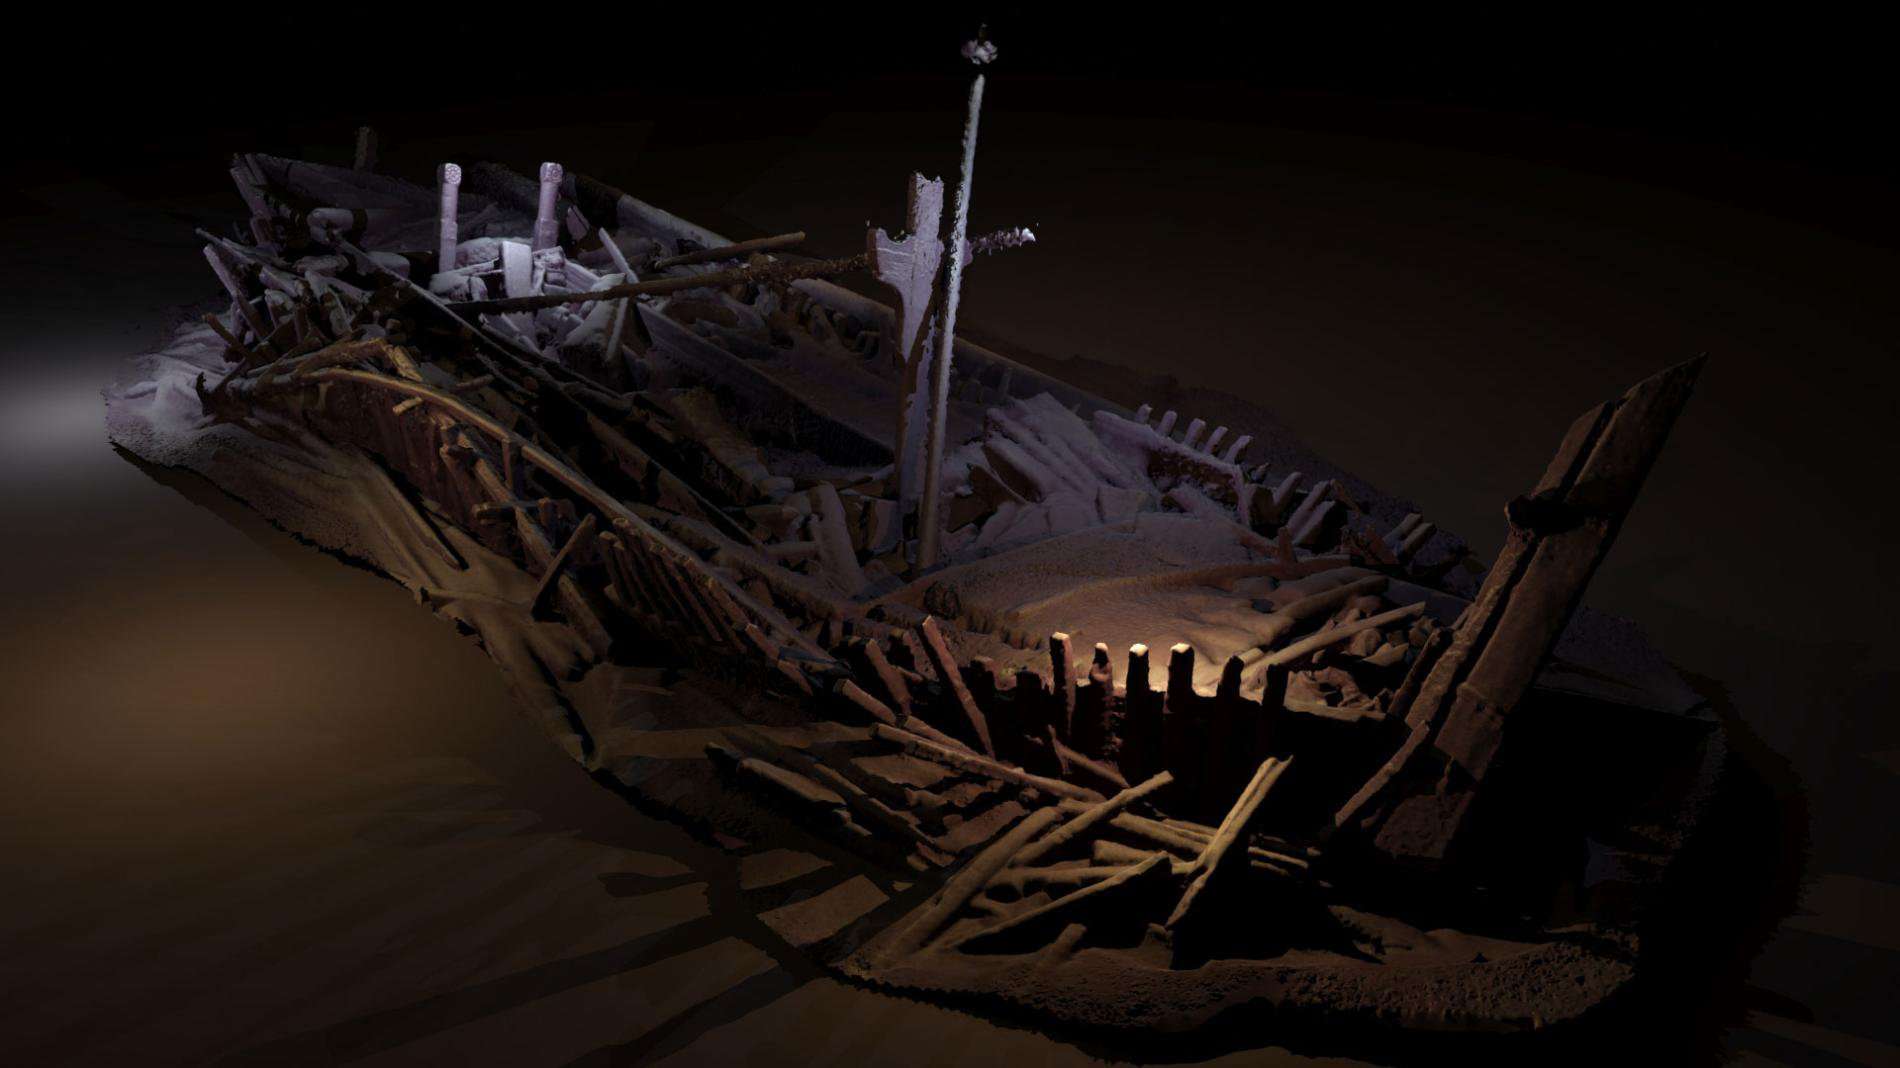 image for Centuries of Preserved Shipwrecks Found in the Black Sea